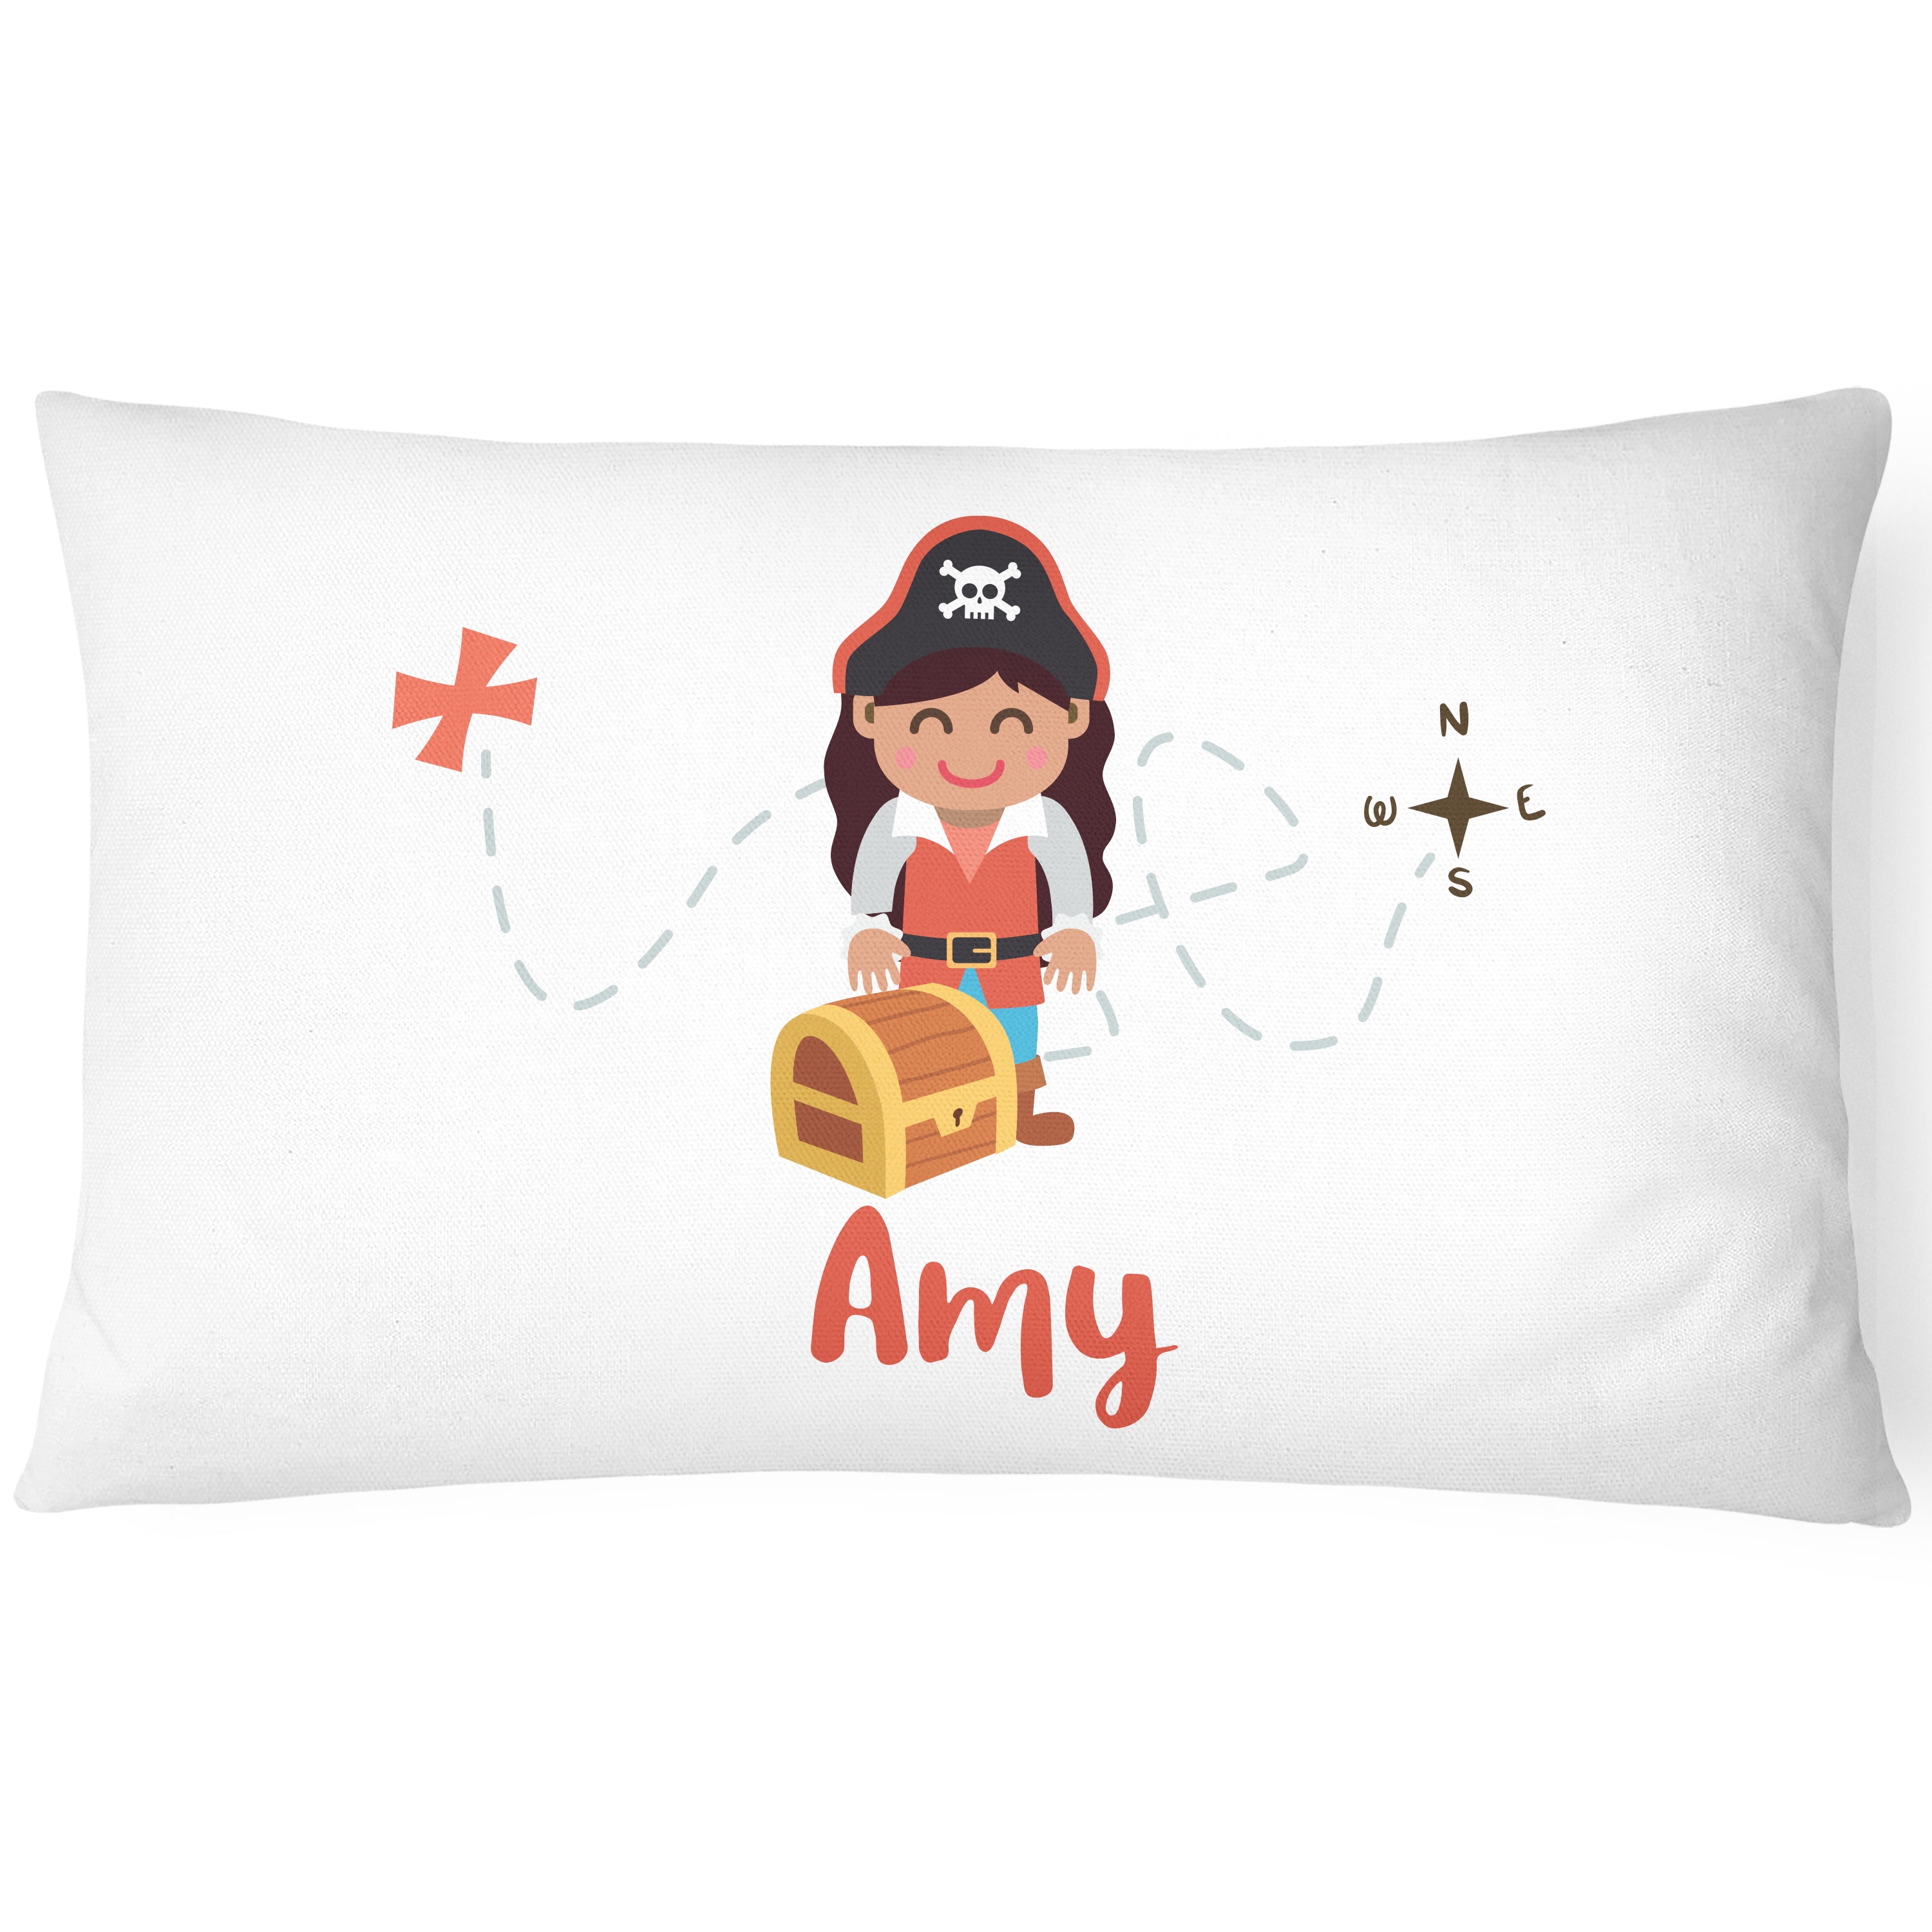 Pirate Pillowcase for Kids - Personalise With Any Name - Perfect Children's Gift - Red + Black